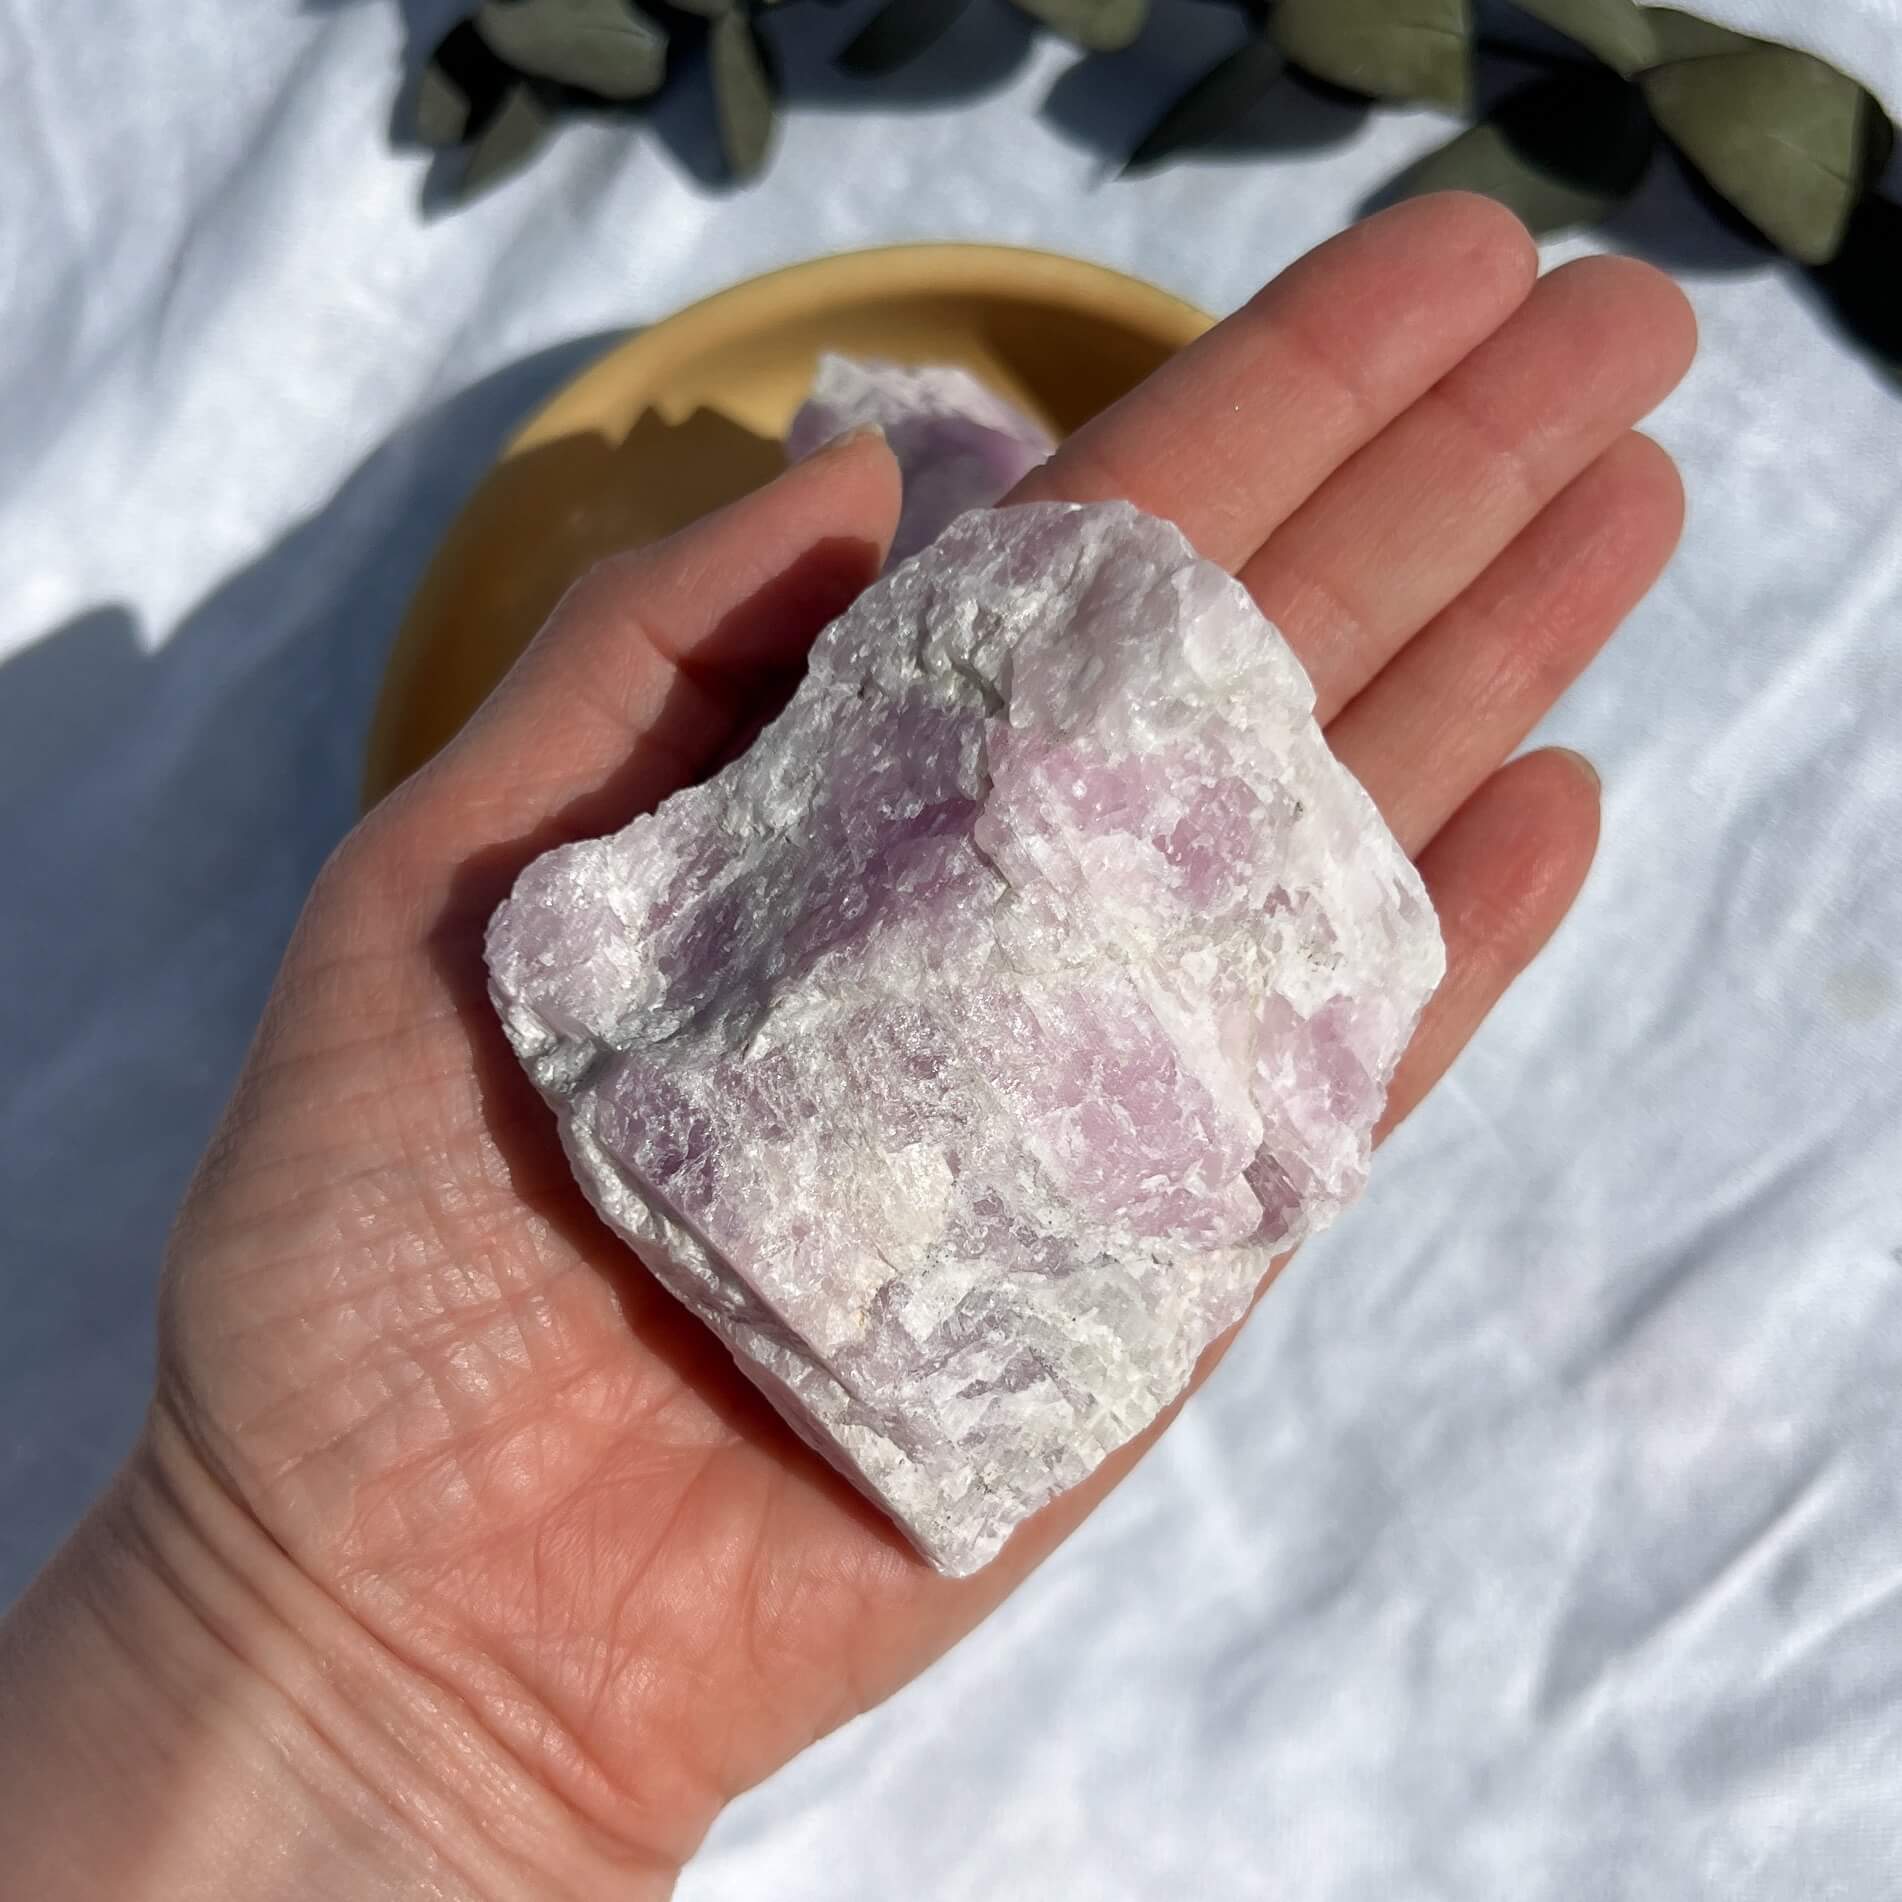 Chalky extra large lilac coloured raw kunzite crystal piece in an outstretched hand